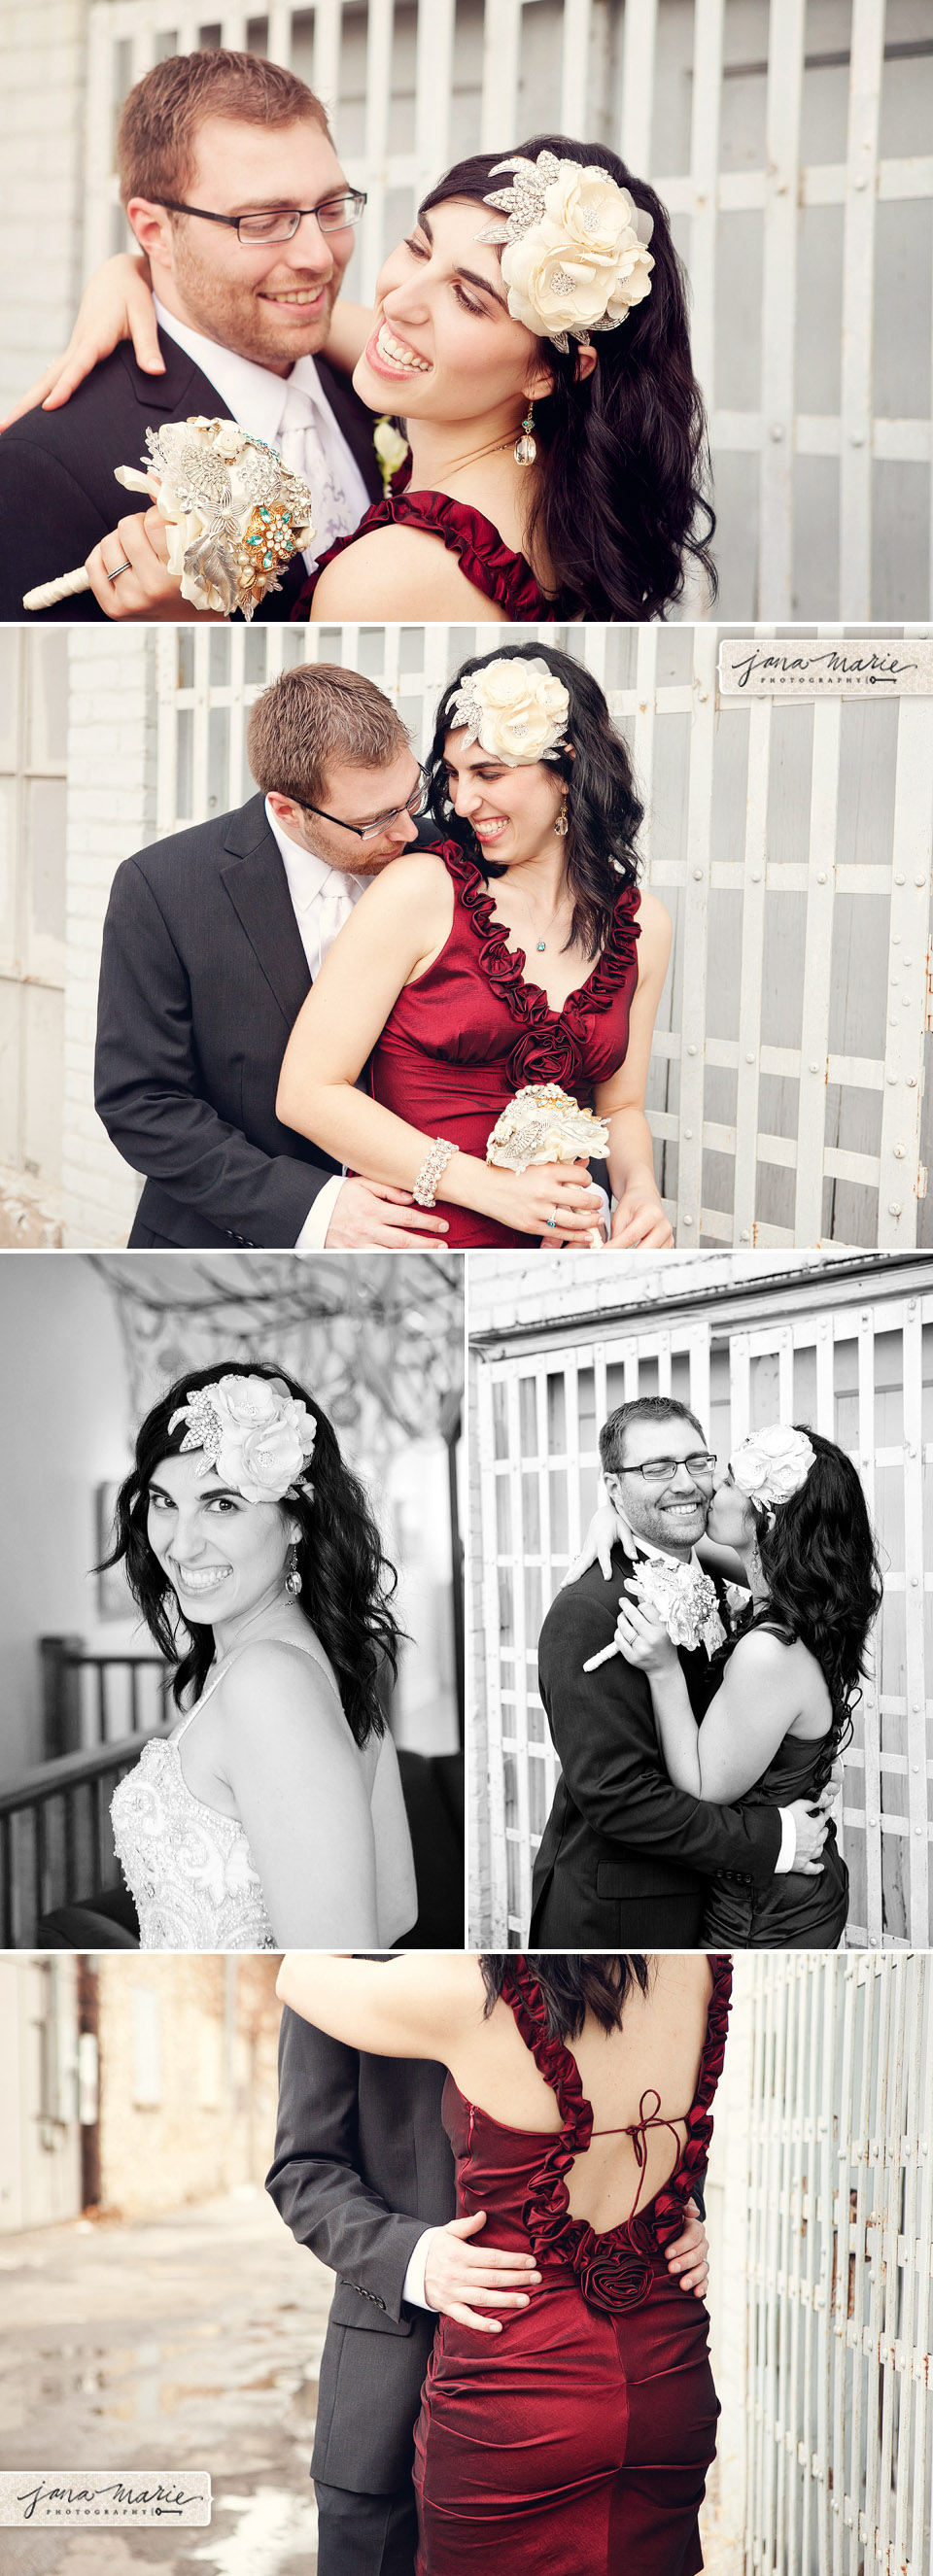 Red wedding dress, Hair pieces, Couples, Love, bridal portraits, Black and white, Jana Marie Photos